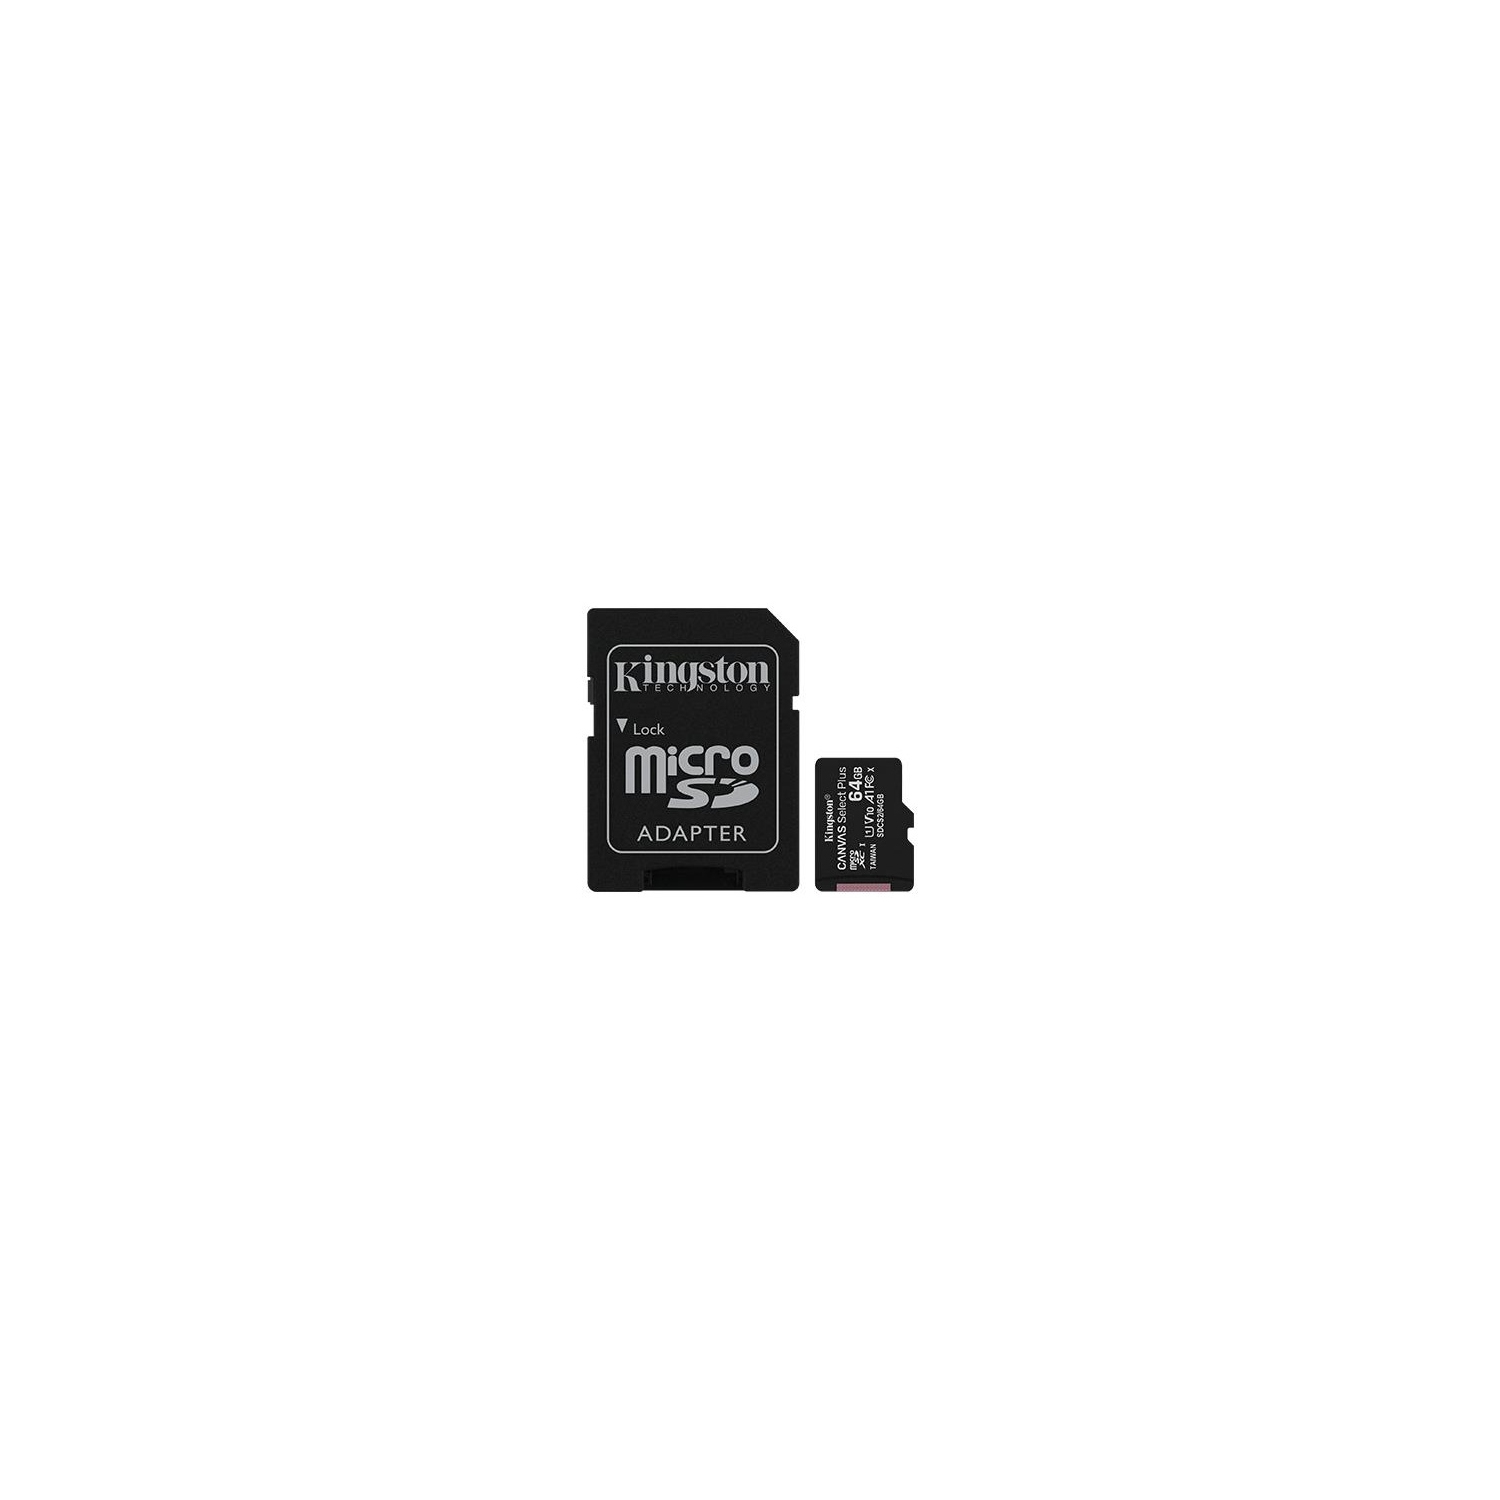 Kingston Canvas Select Plus microSDXC 64GB Class 10 UHS-I Up to 100MB/s Read (SDCS2/64GBCR)